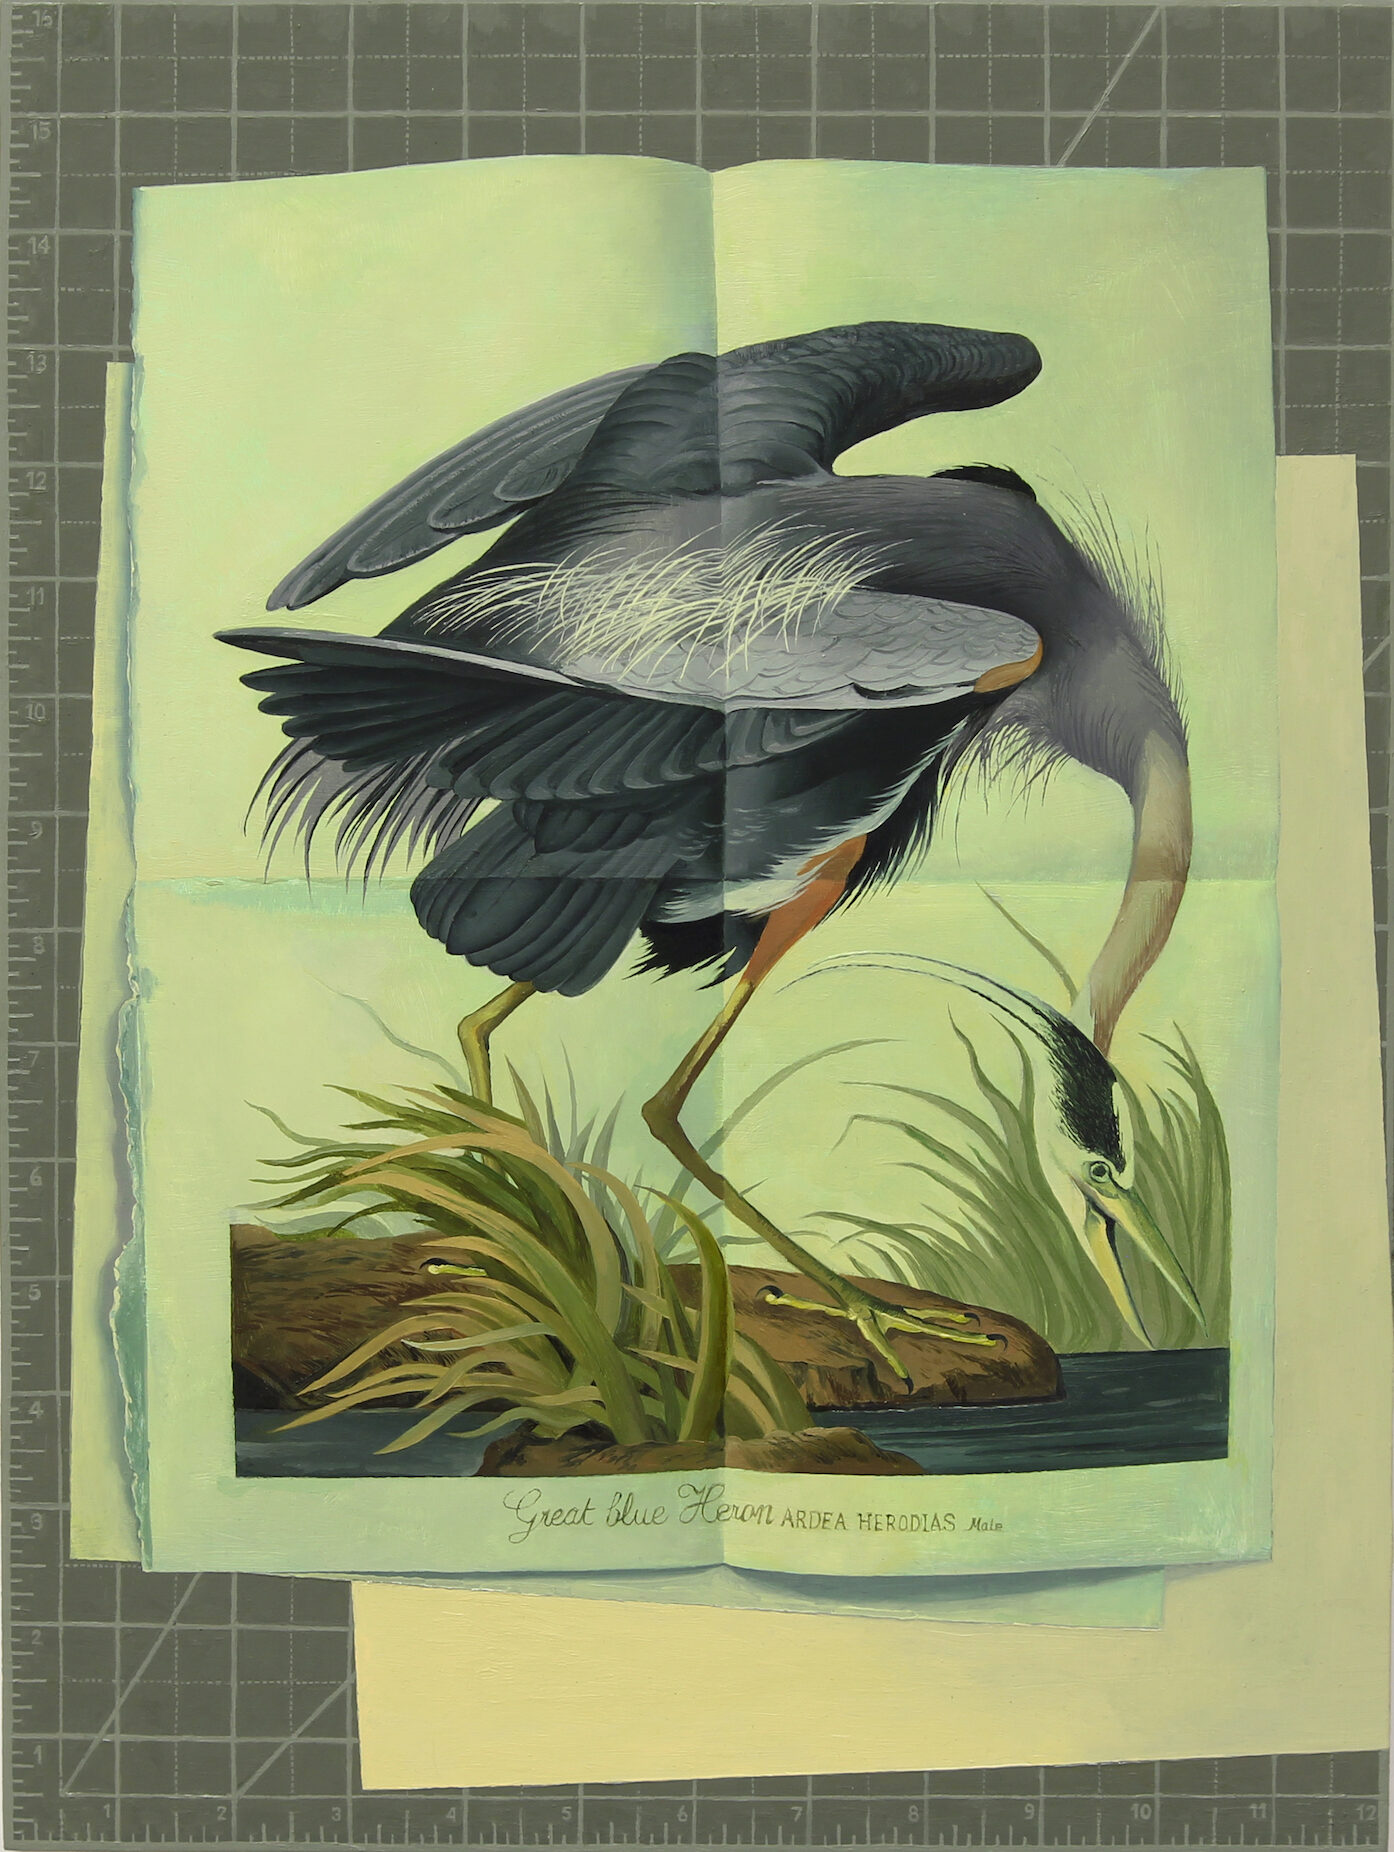 painting of heron on folded paper